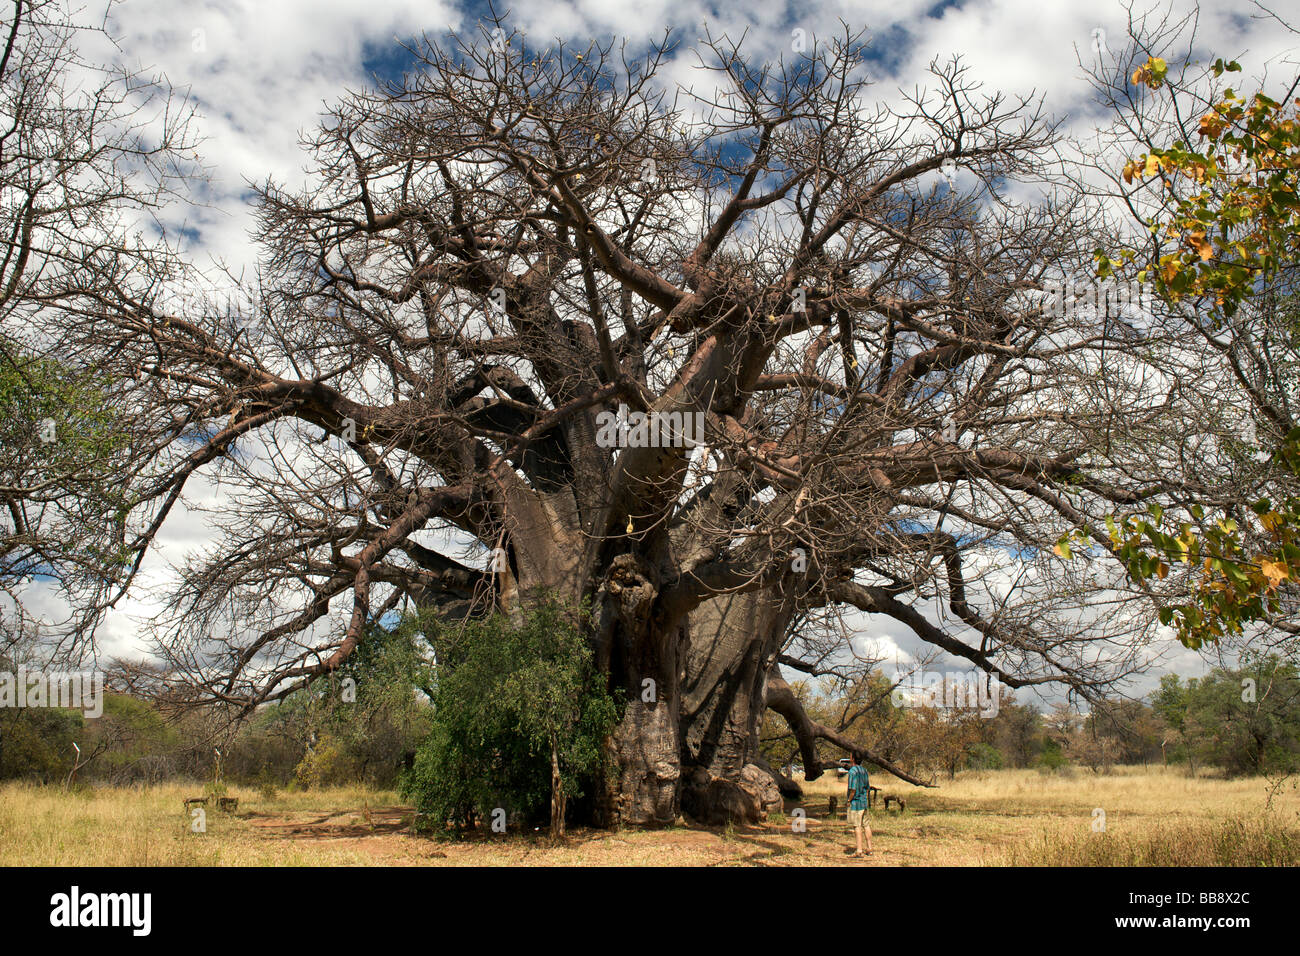 A man is dwarfed by the Big Tree a 3000 year old Baobab tree in Limpopo Province, South Africa. Stock Photo